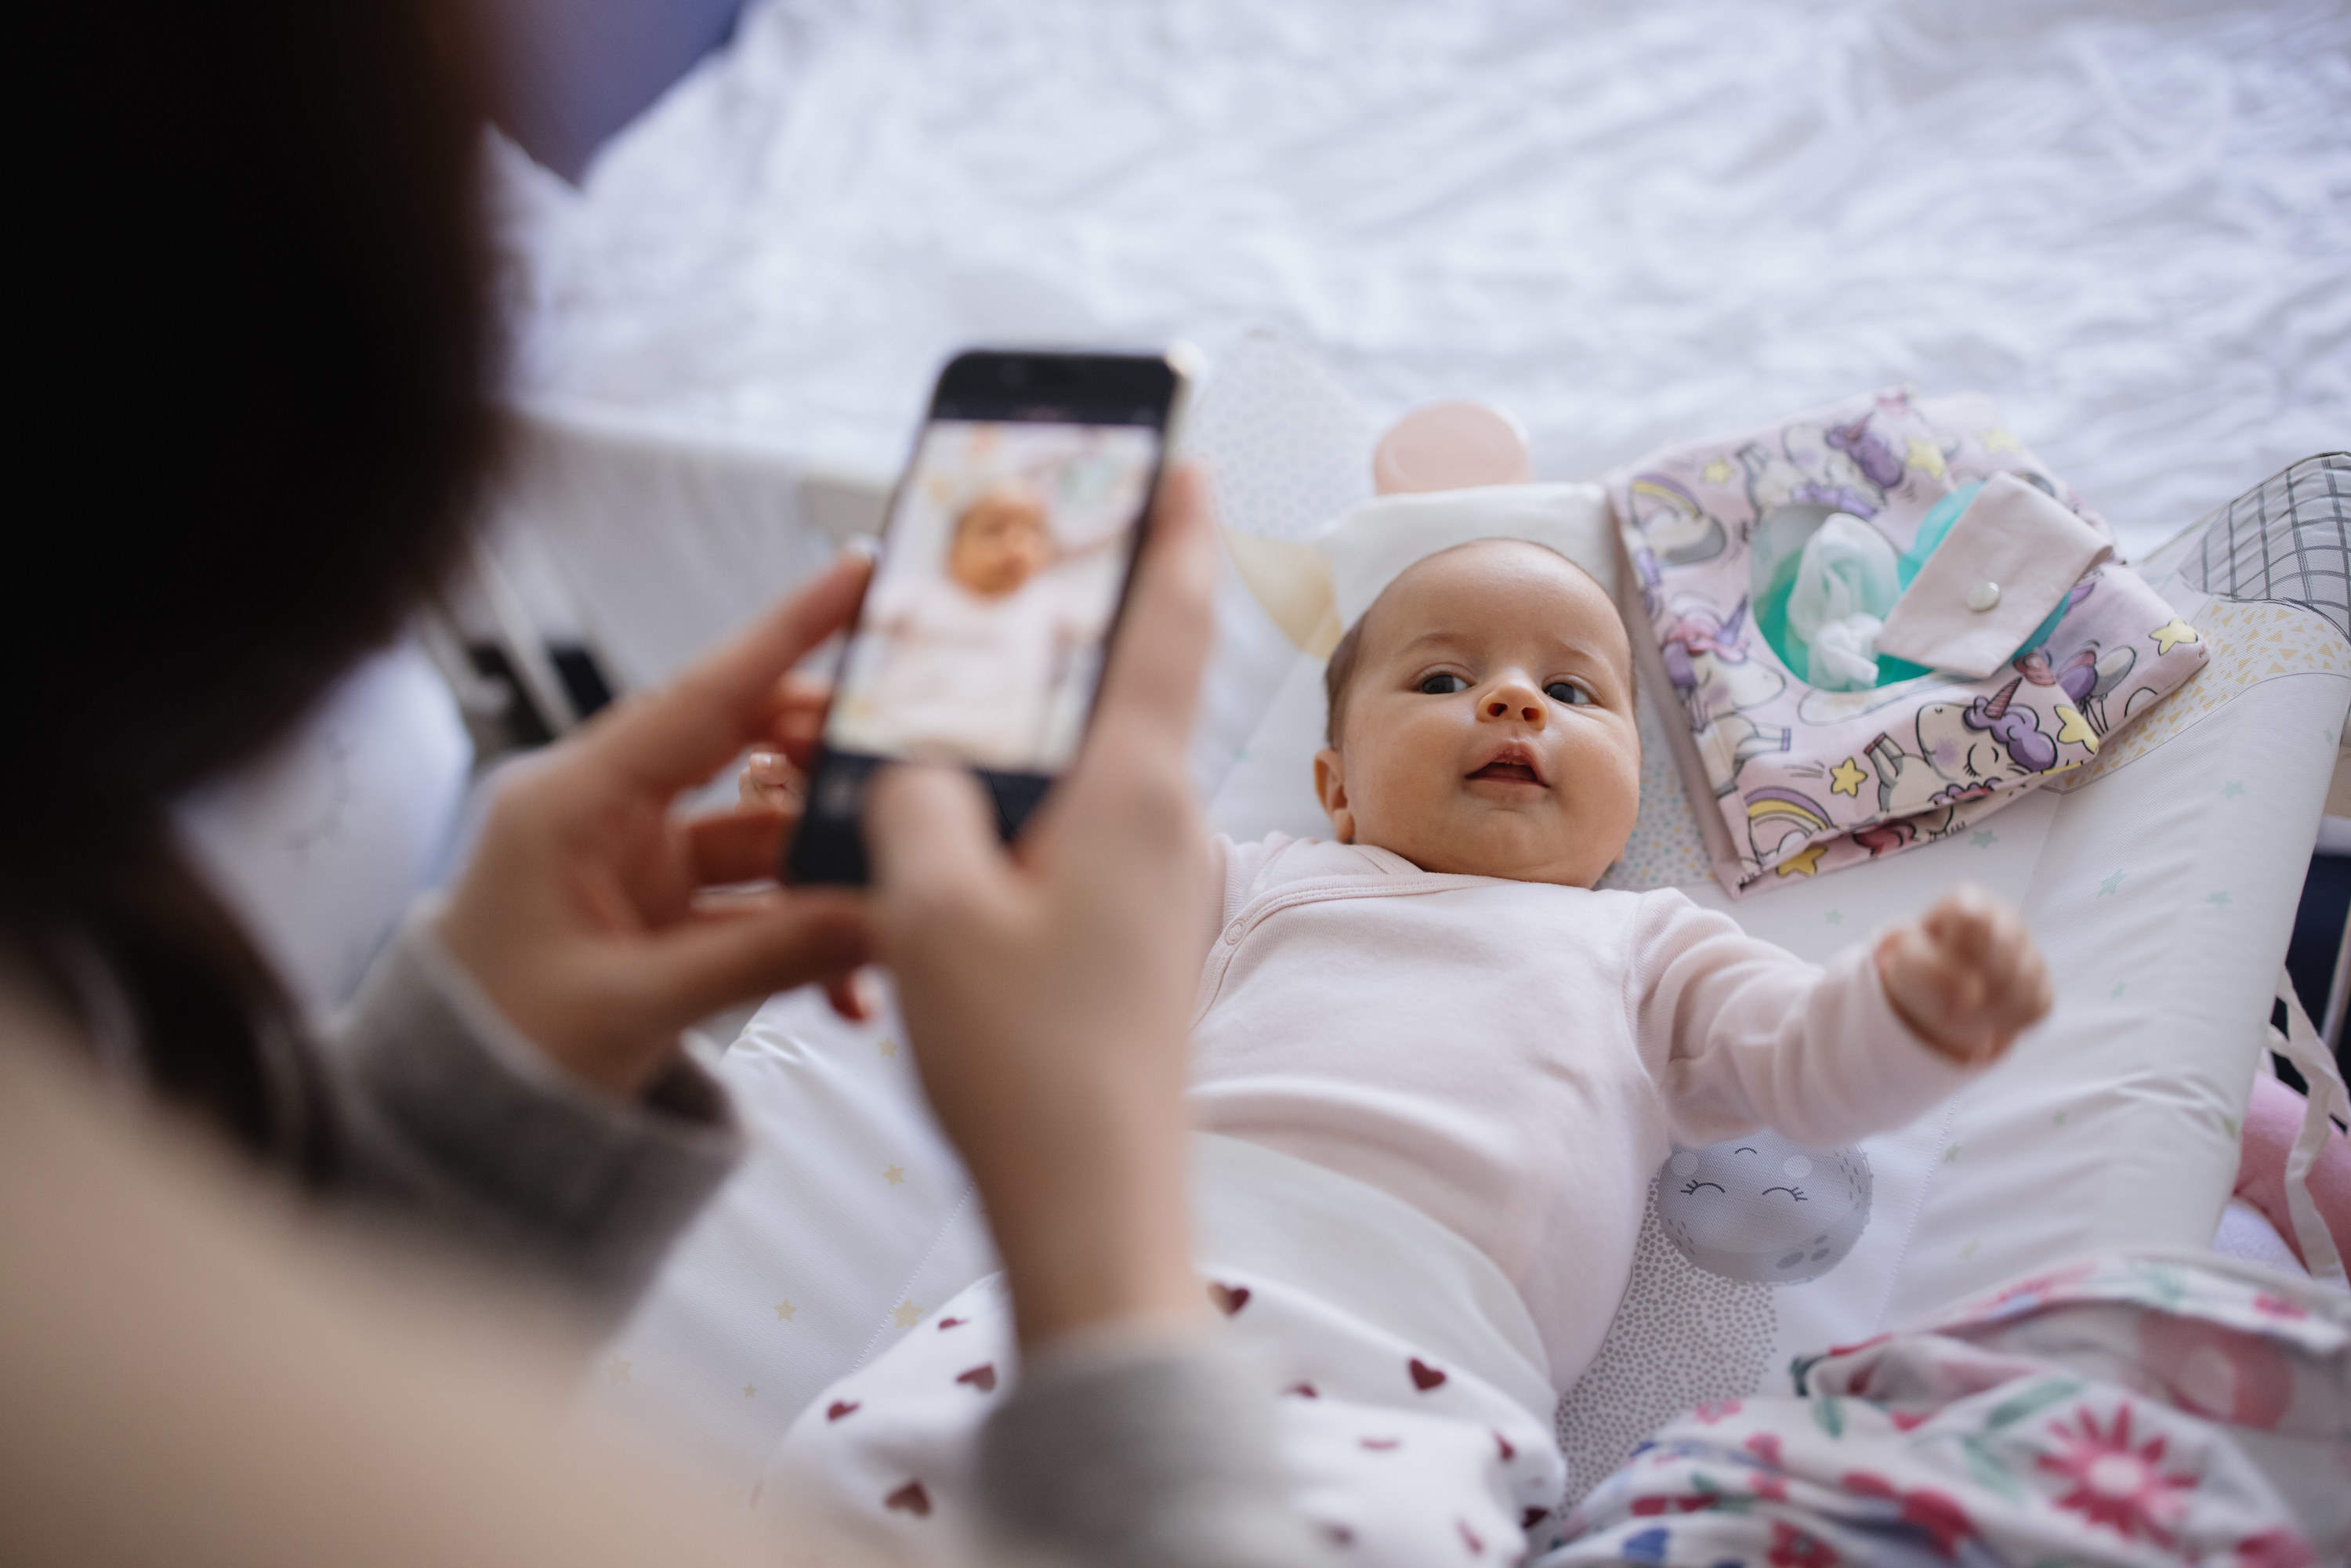 Woman takes photo of baby